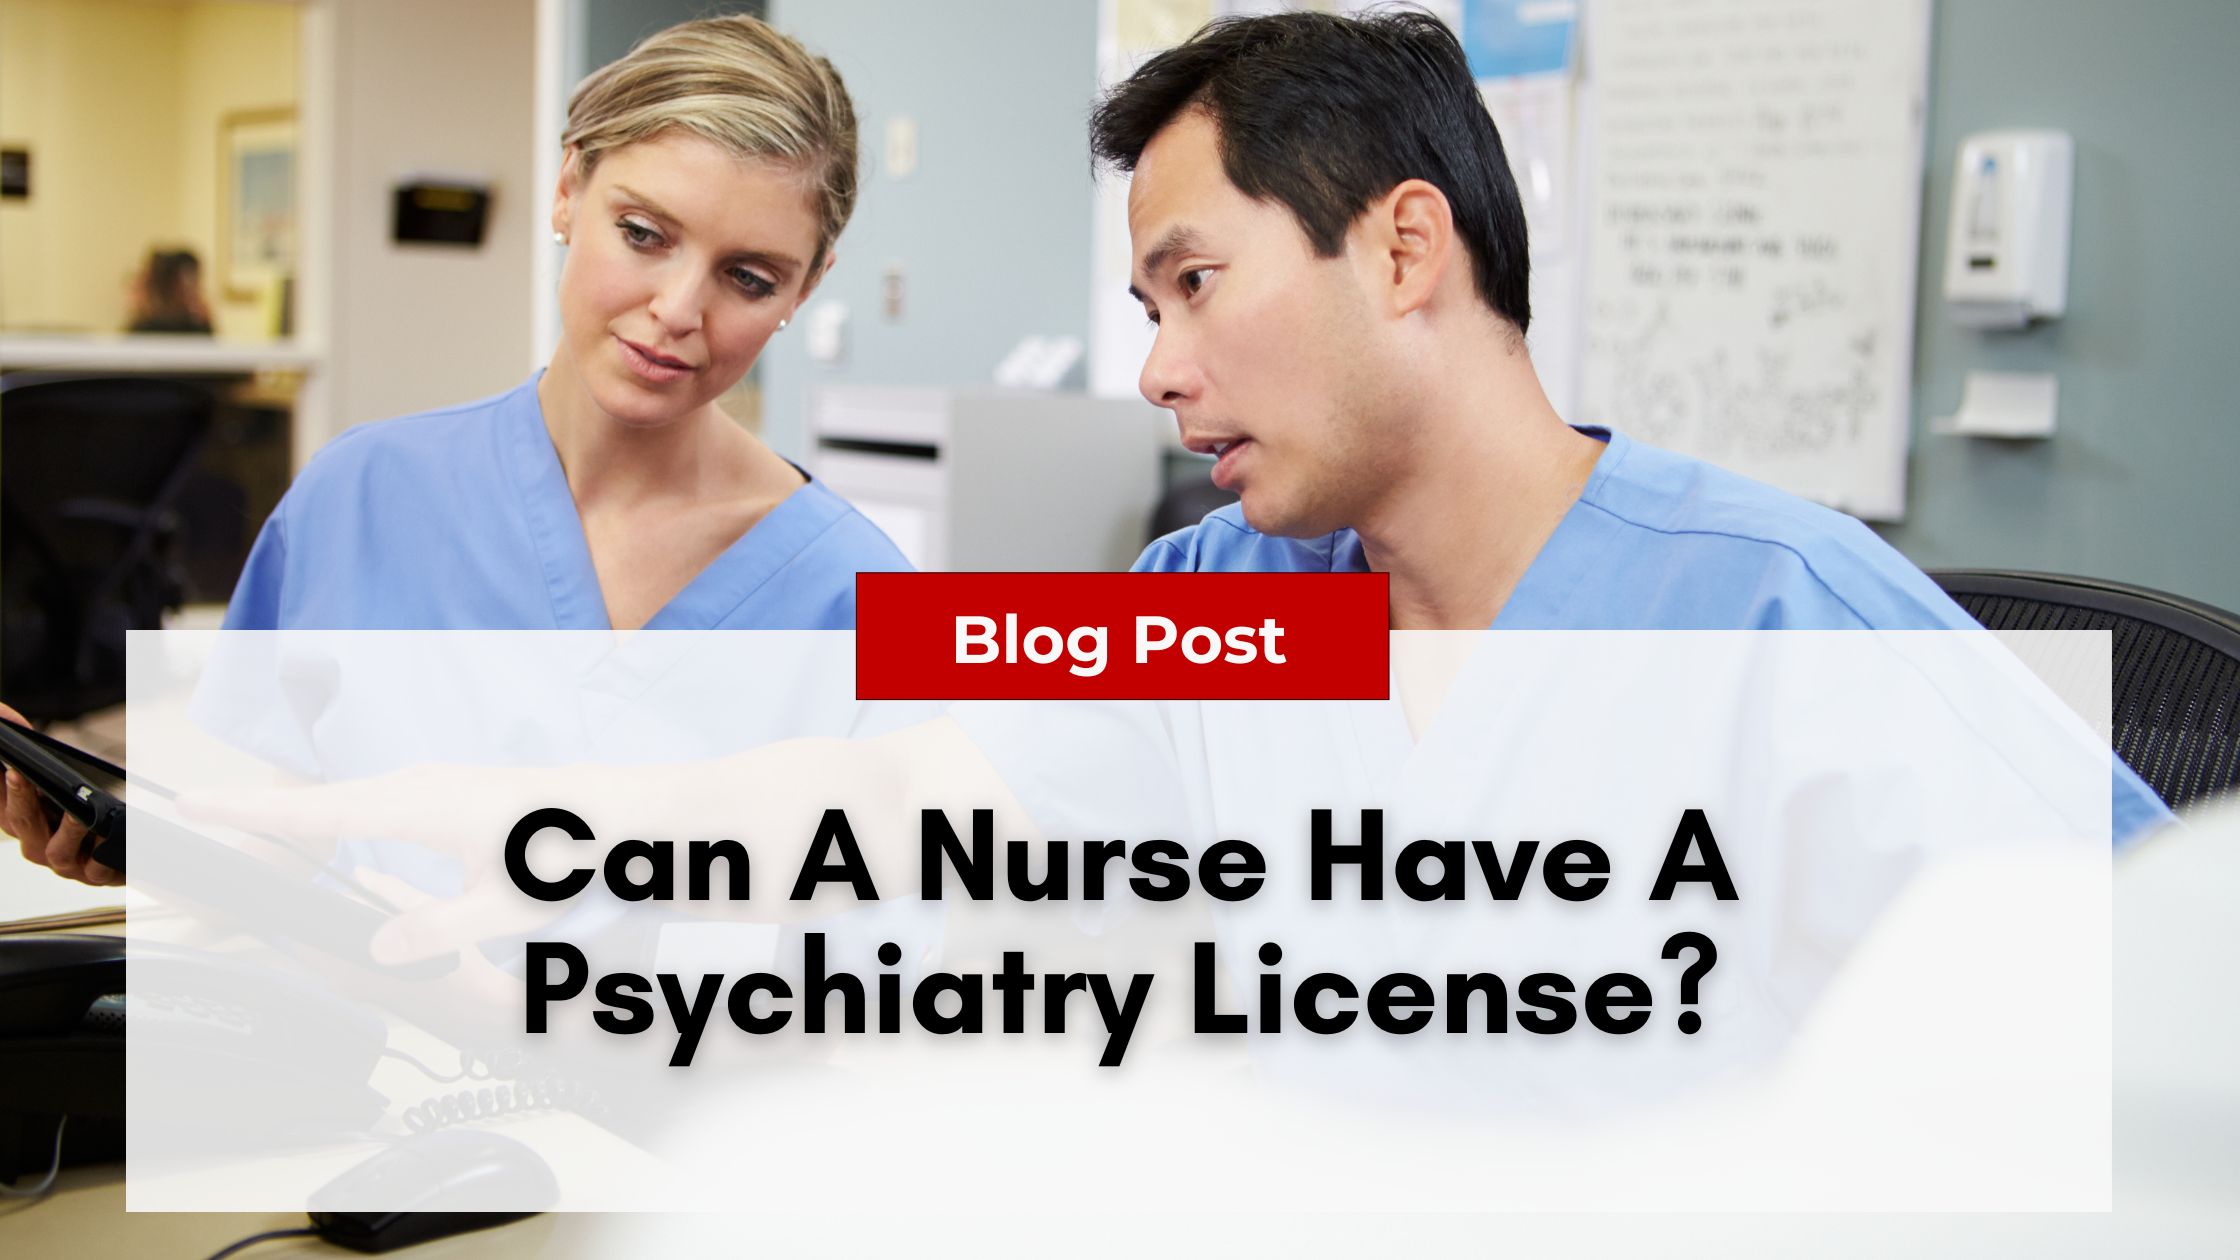 Two healthcare professionals in blue scrubs are discussing something on a tablet. A blog post banner reads, "Can A Nurse Have A Psychiatry License?